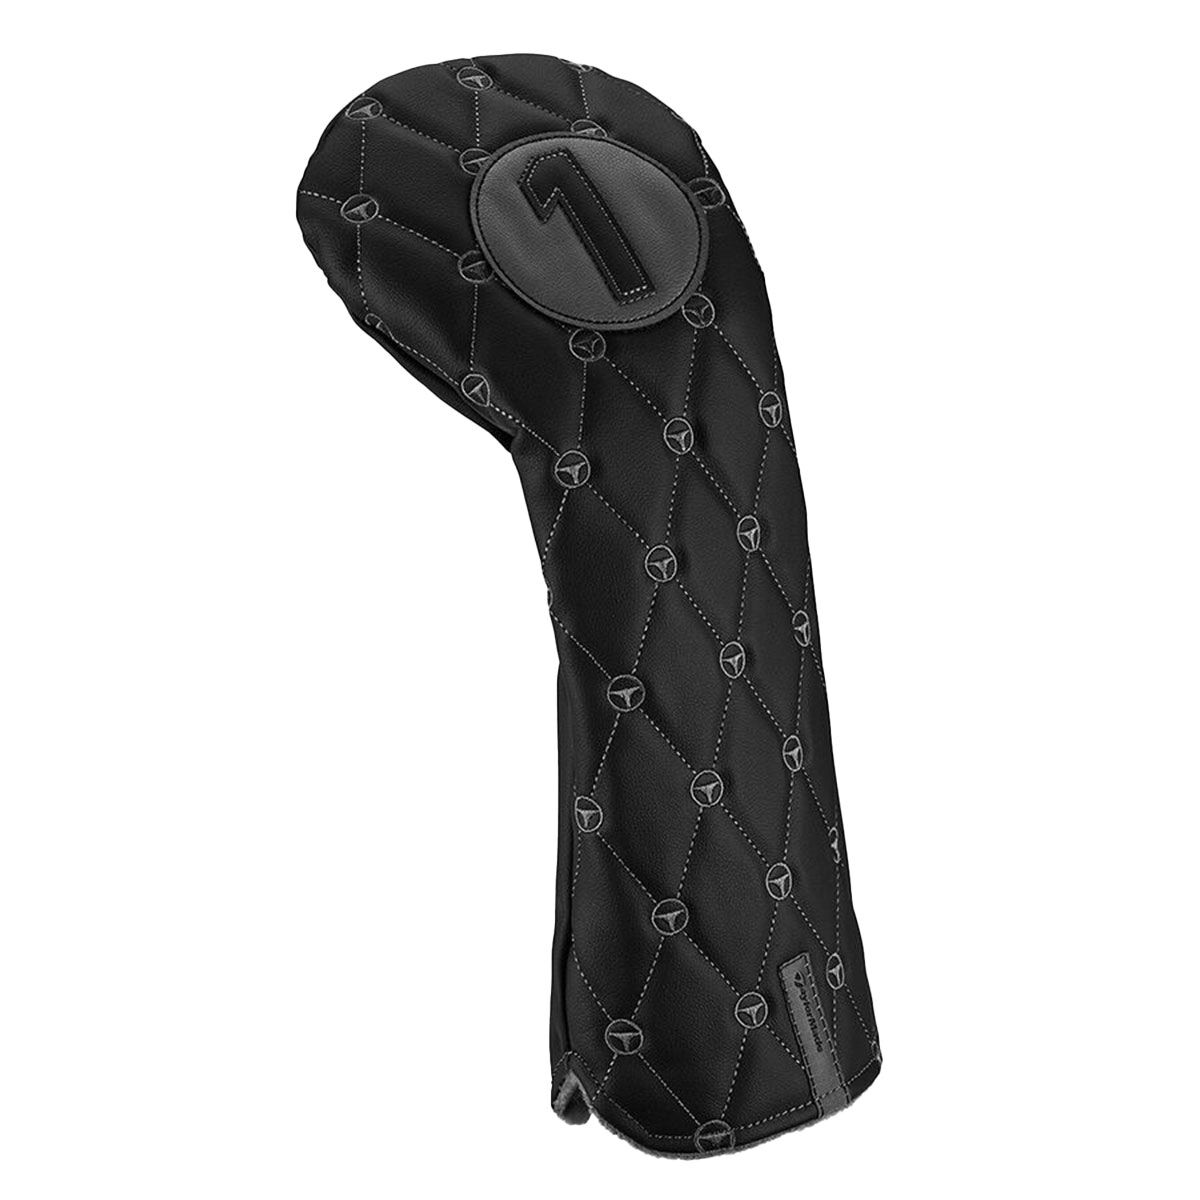 TaylorMade Mens Black Stylish Quilted Patterned Golf Driver Head Cover | American Golf von TaylorMade